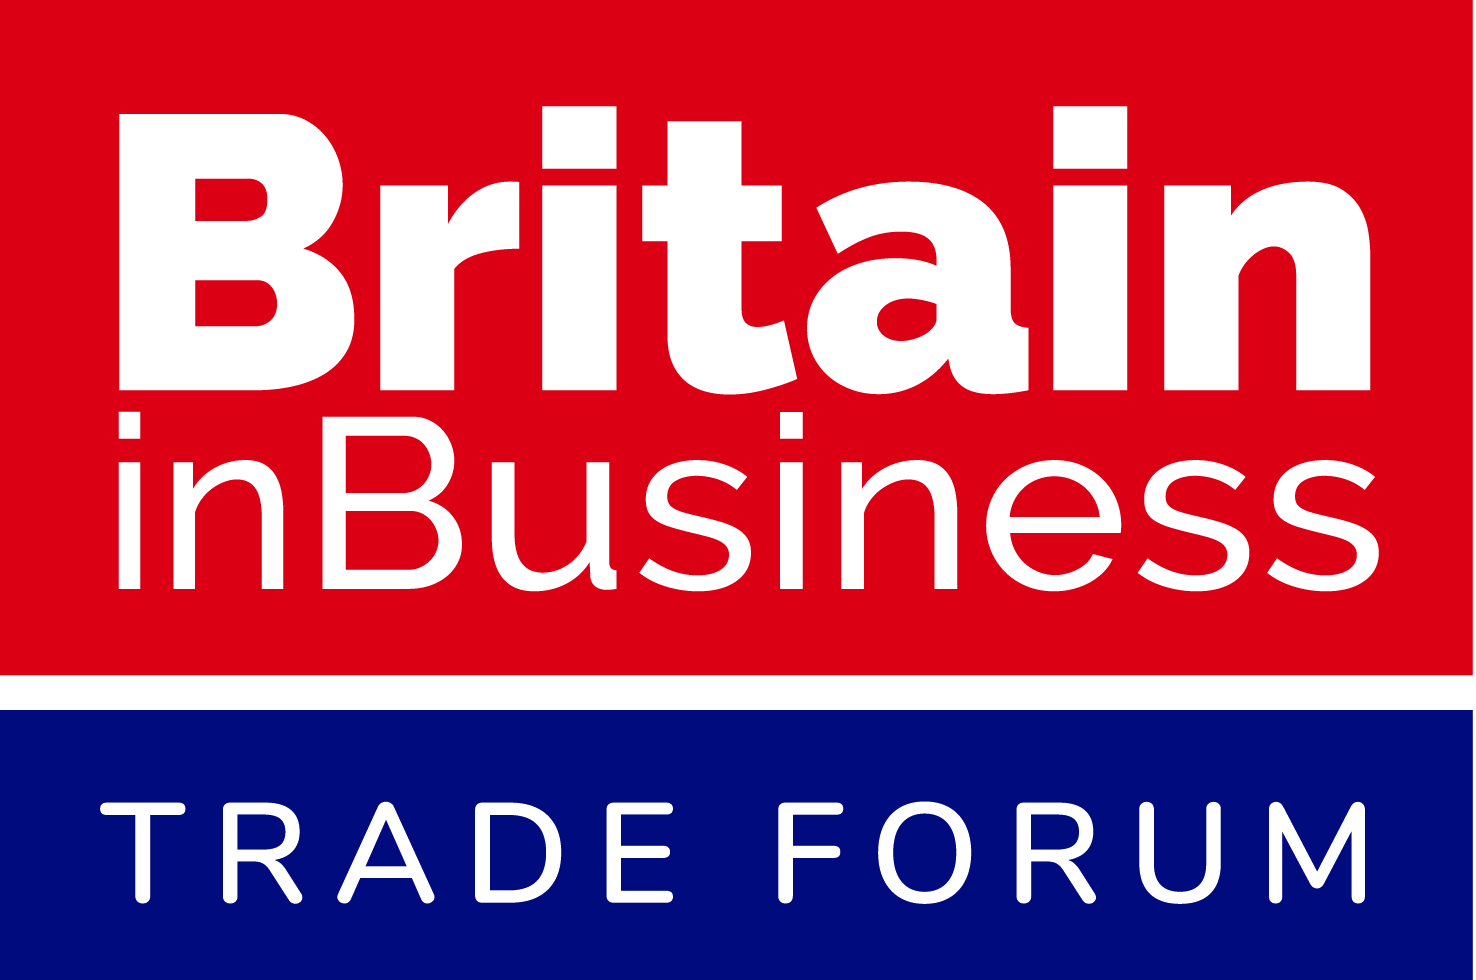 Helping Britain into Global Business | TheBusinessDesk.com